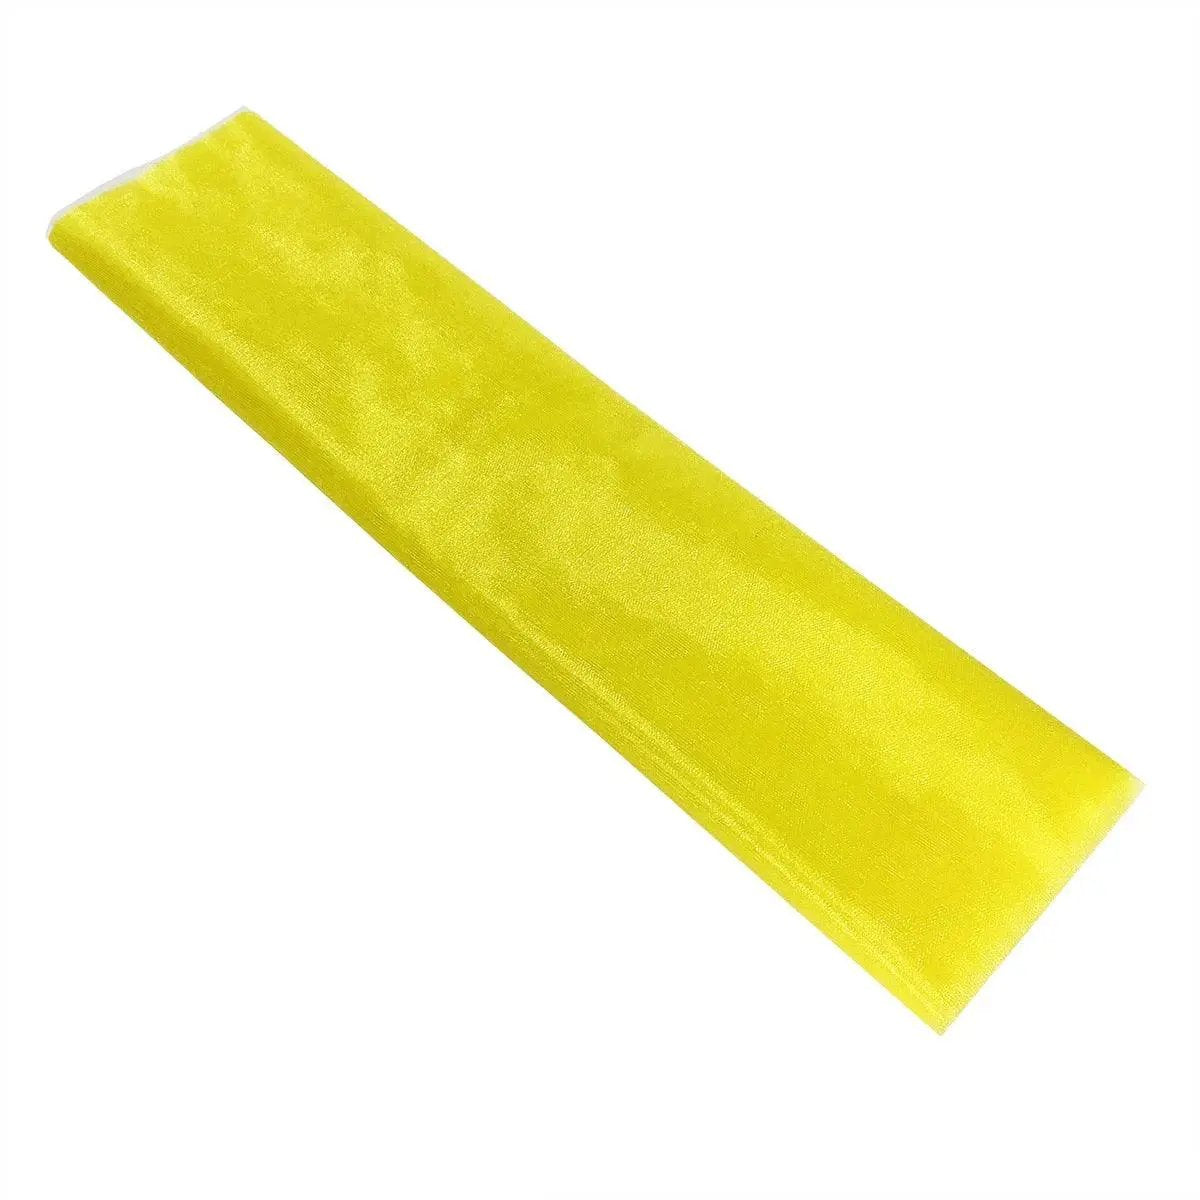 a piece of yellow tape on a white background